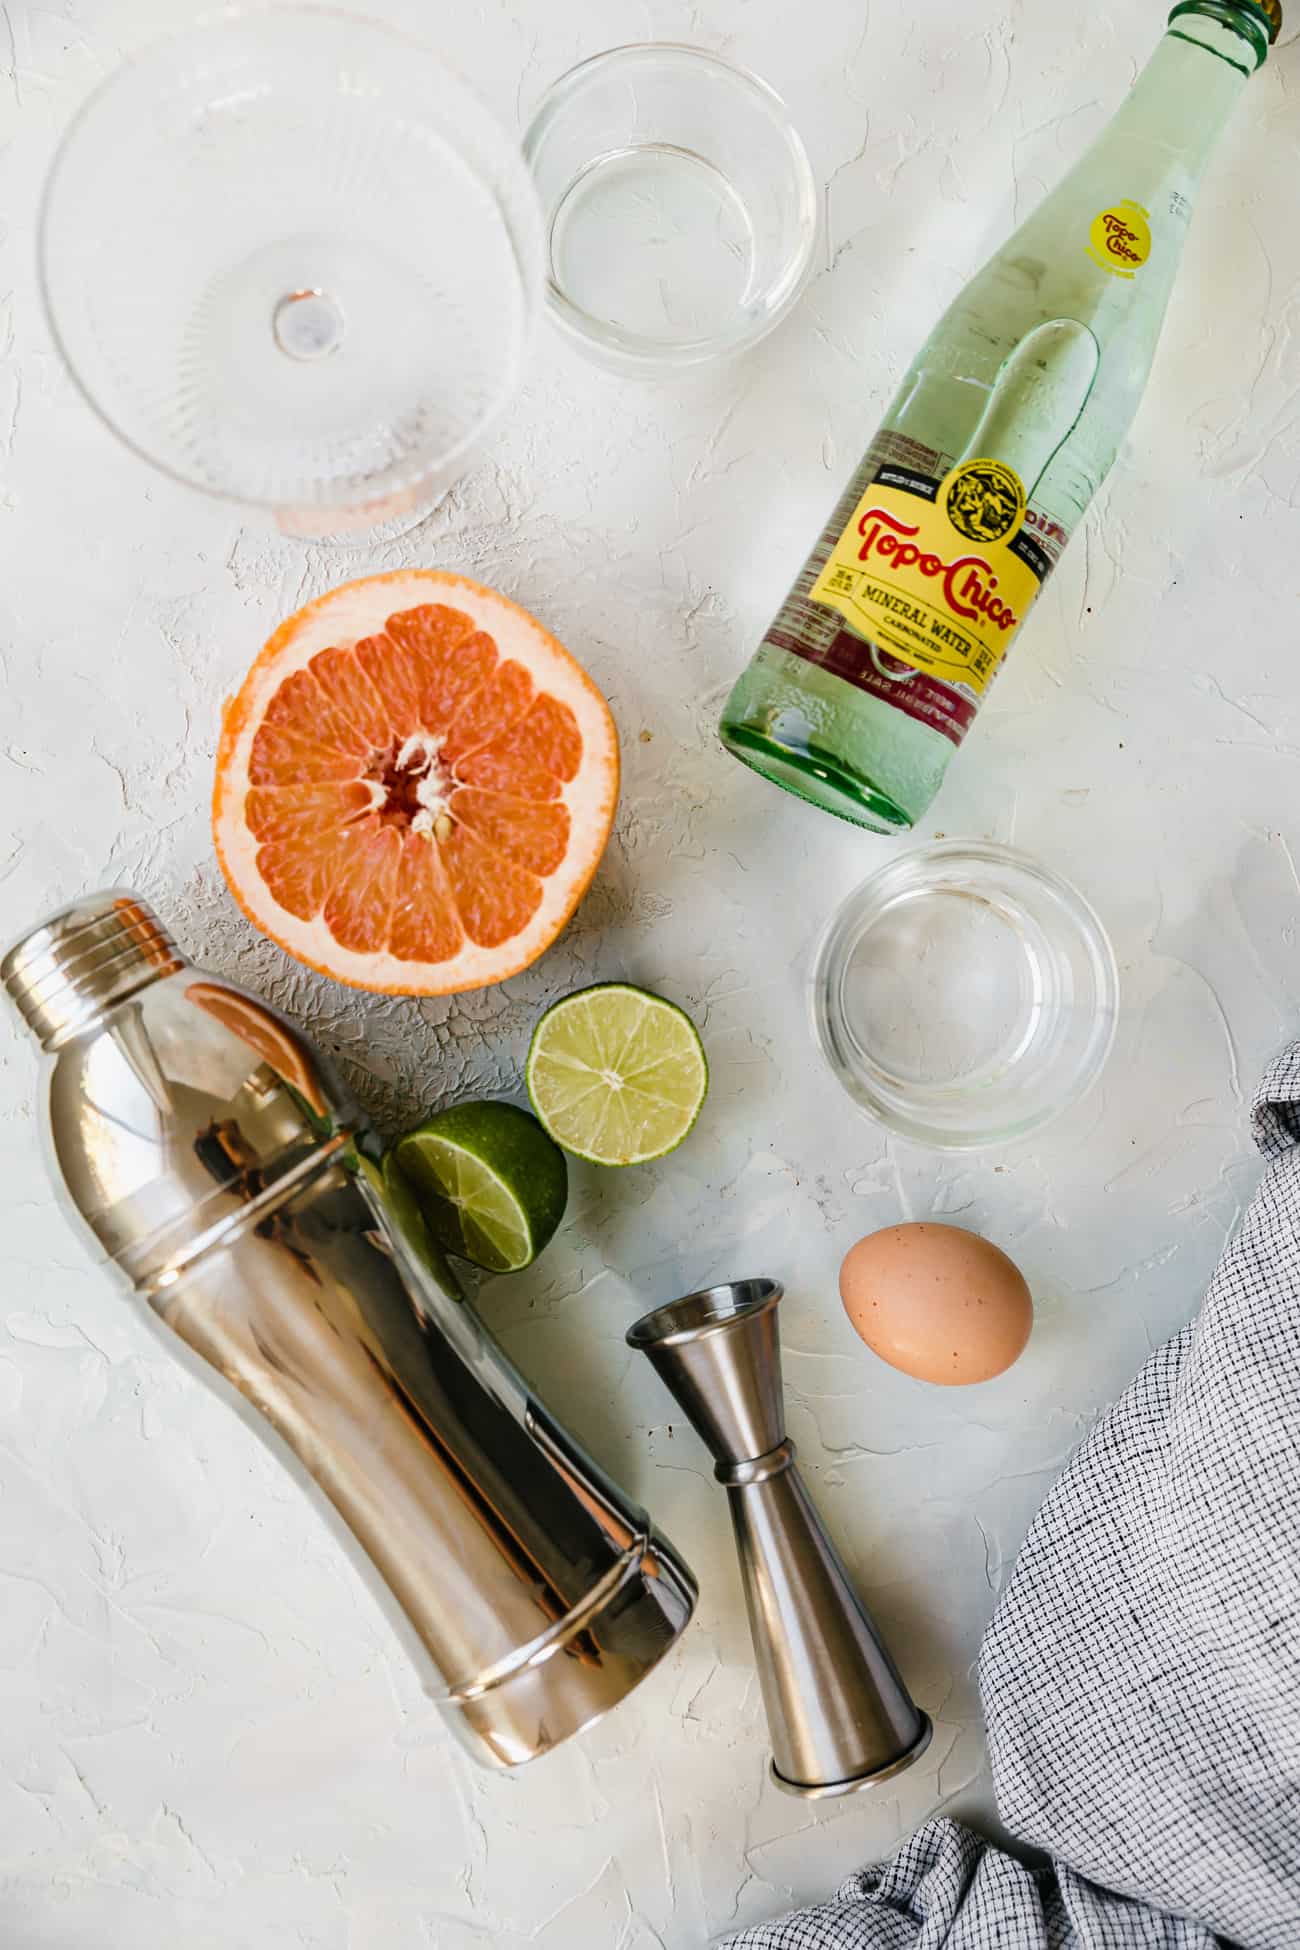 ingredients laid out to make a Paloma: grapefruit, sparkling water, limes, an egg, tequila, and simple syrup.